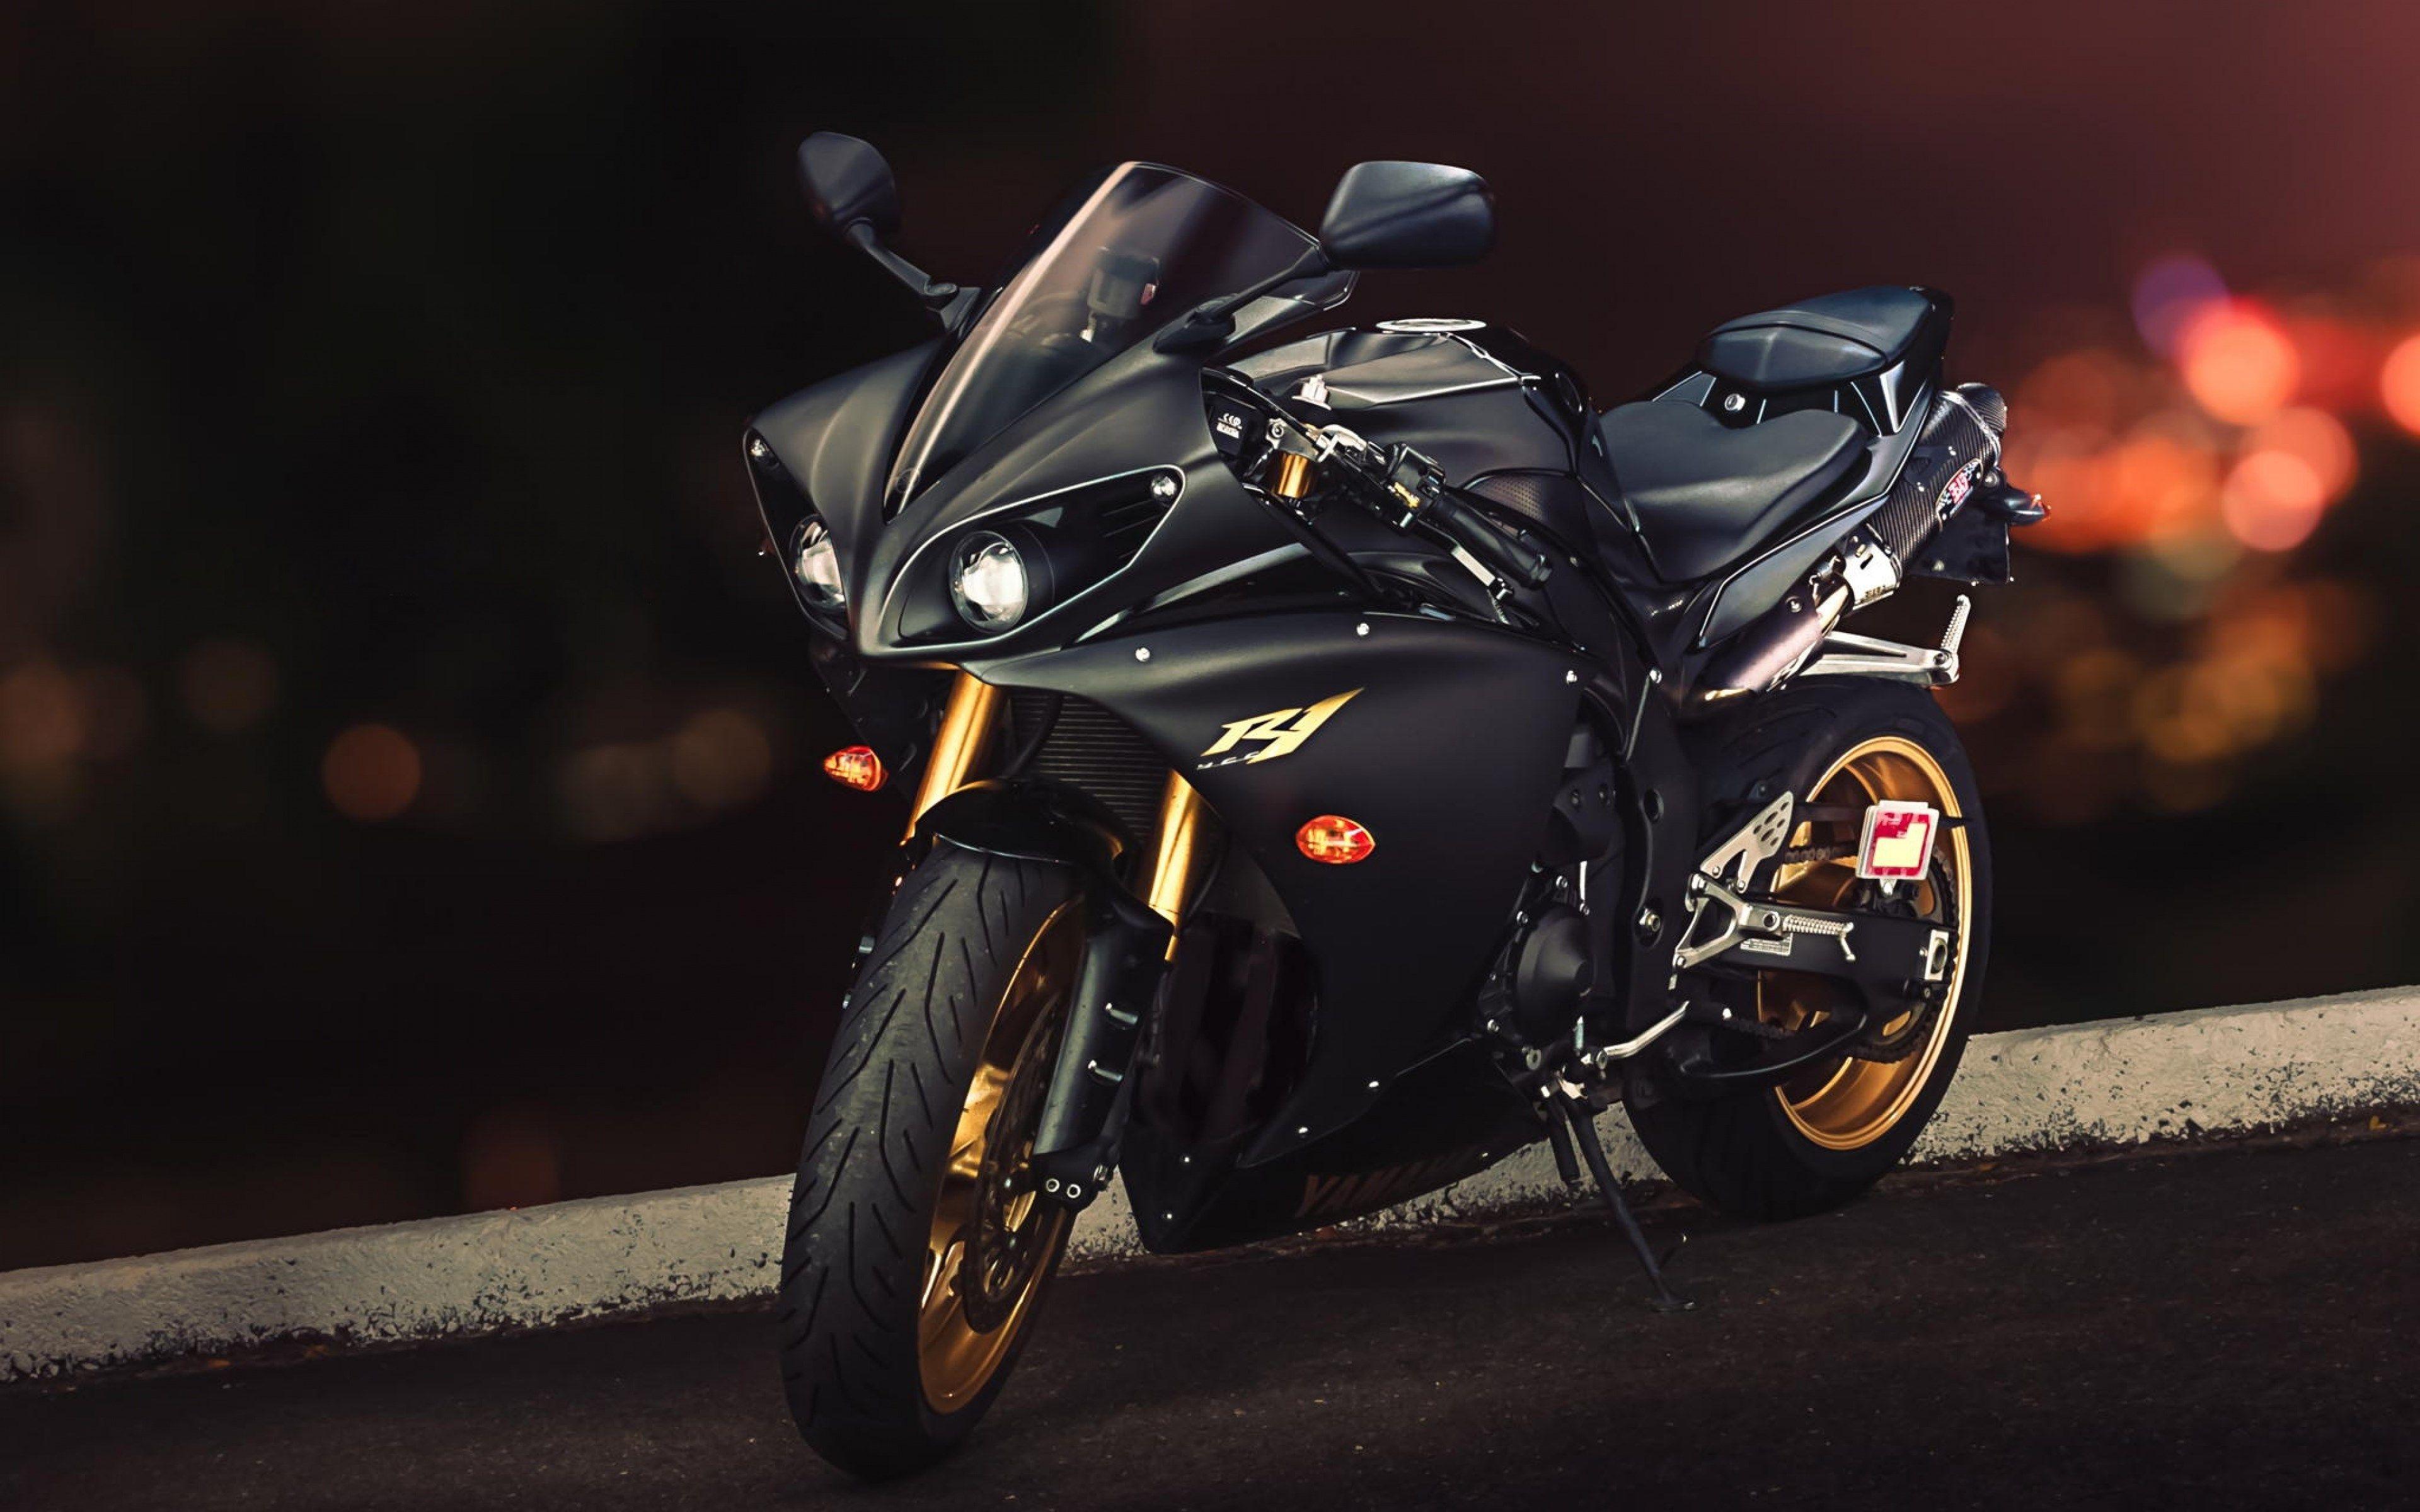 Yamaha YZF-R1M Supersport Motorcycle Wallpapers - Wallpaper Cave